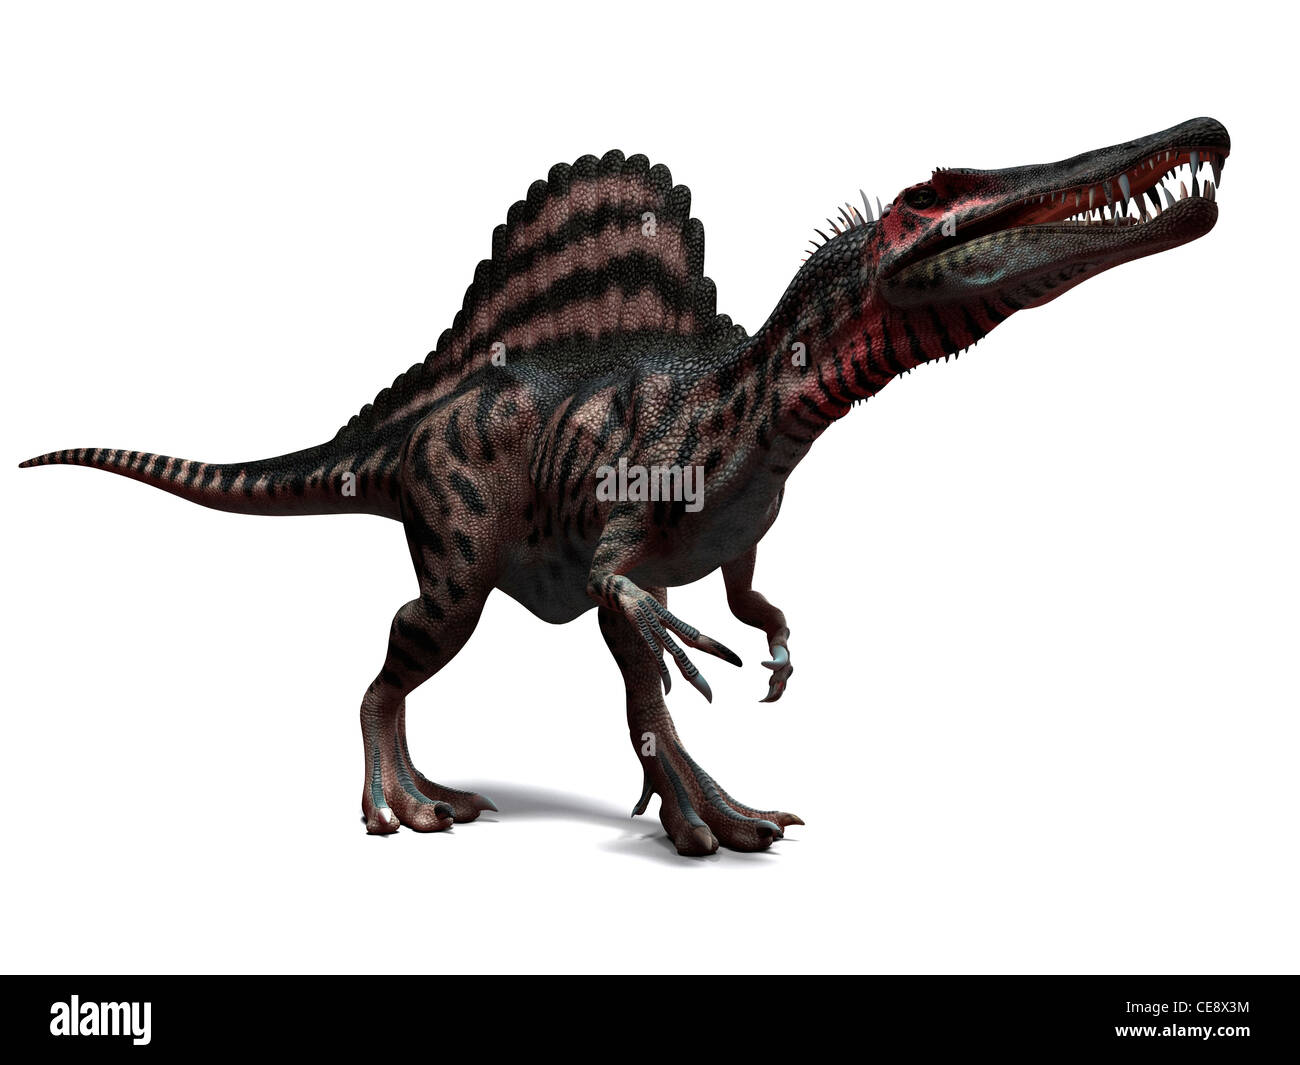 Spinosaurus dinosaur, computer artwork. This dinosaur lived 95 to 80 million years ago during the Late Cretaceous period. Stock Photo